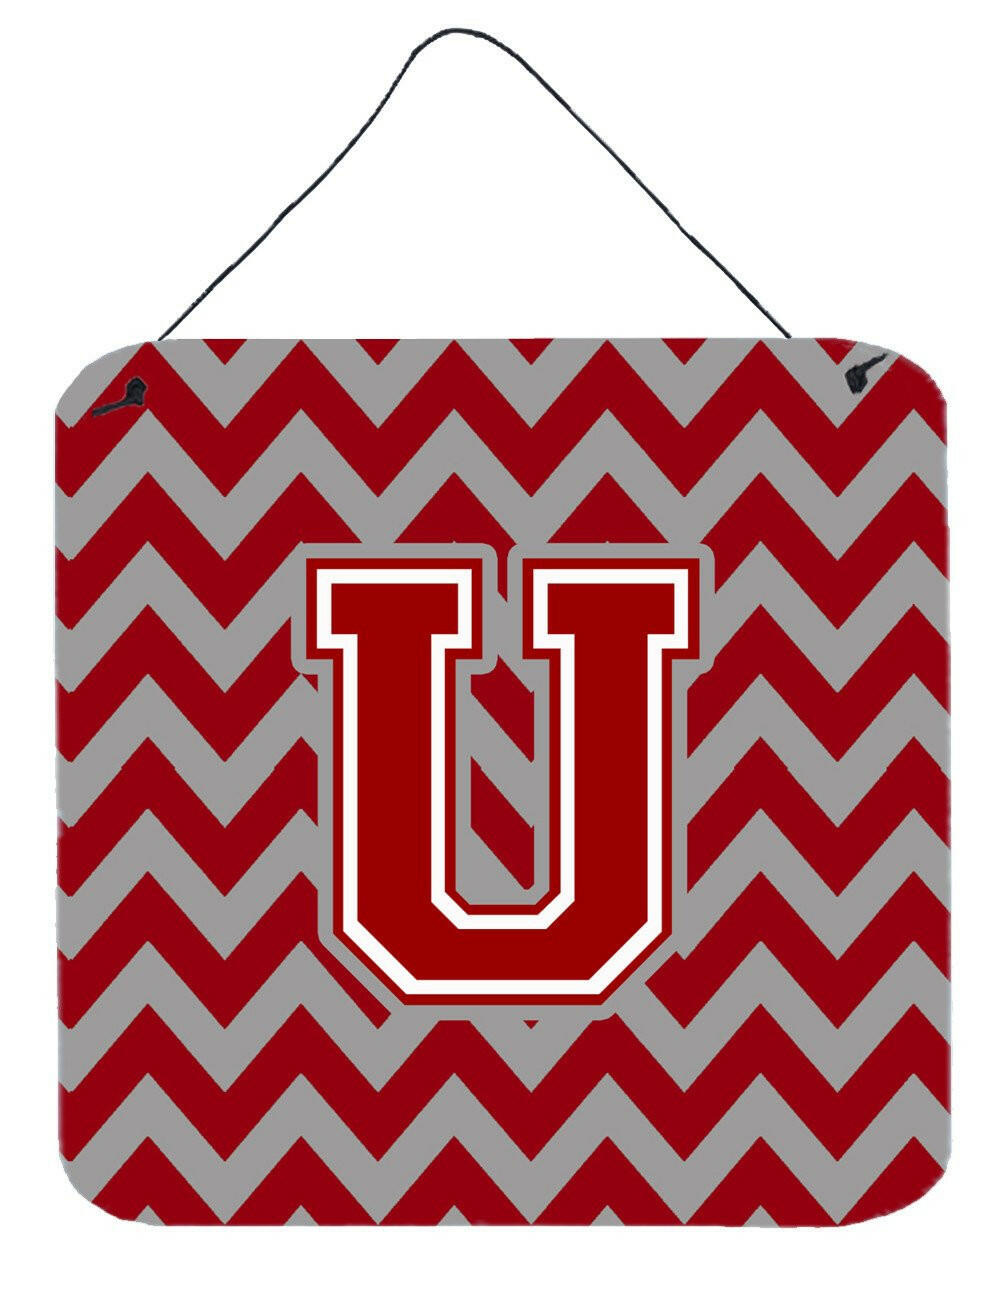 Letter U Chevron Maroon and White Wall or Door Hanging Prints CJ1049-UDS66 by Caroline's Treasures